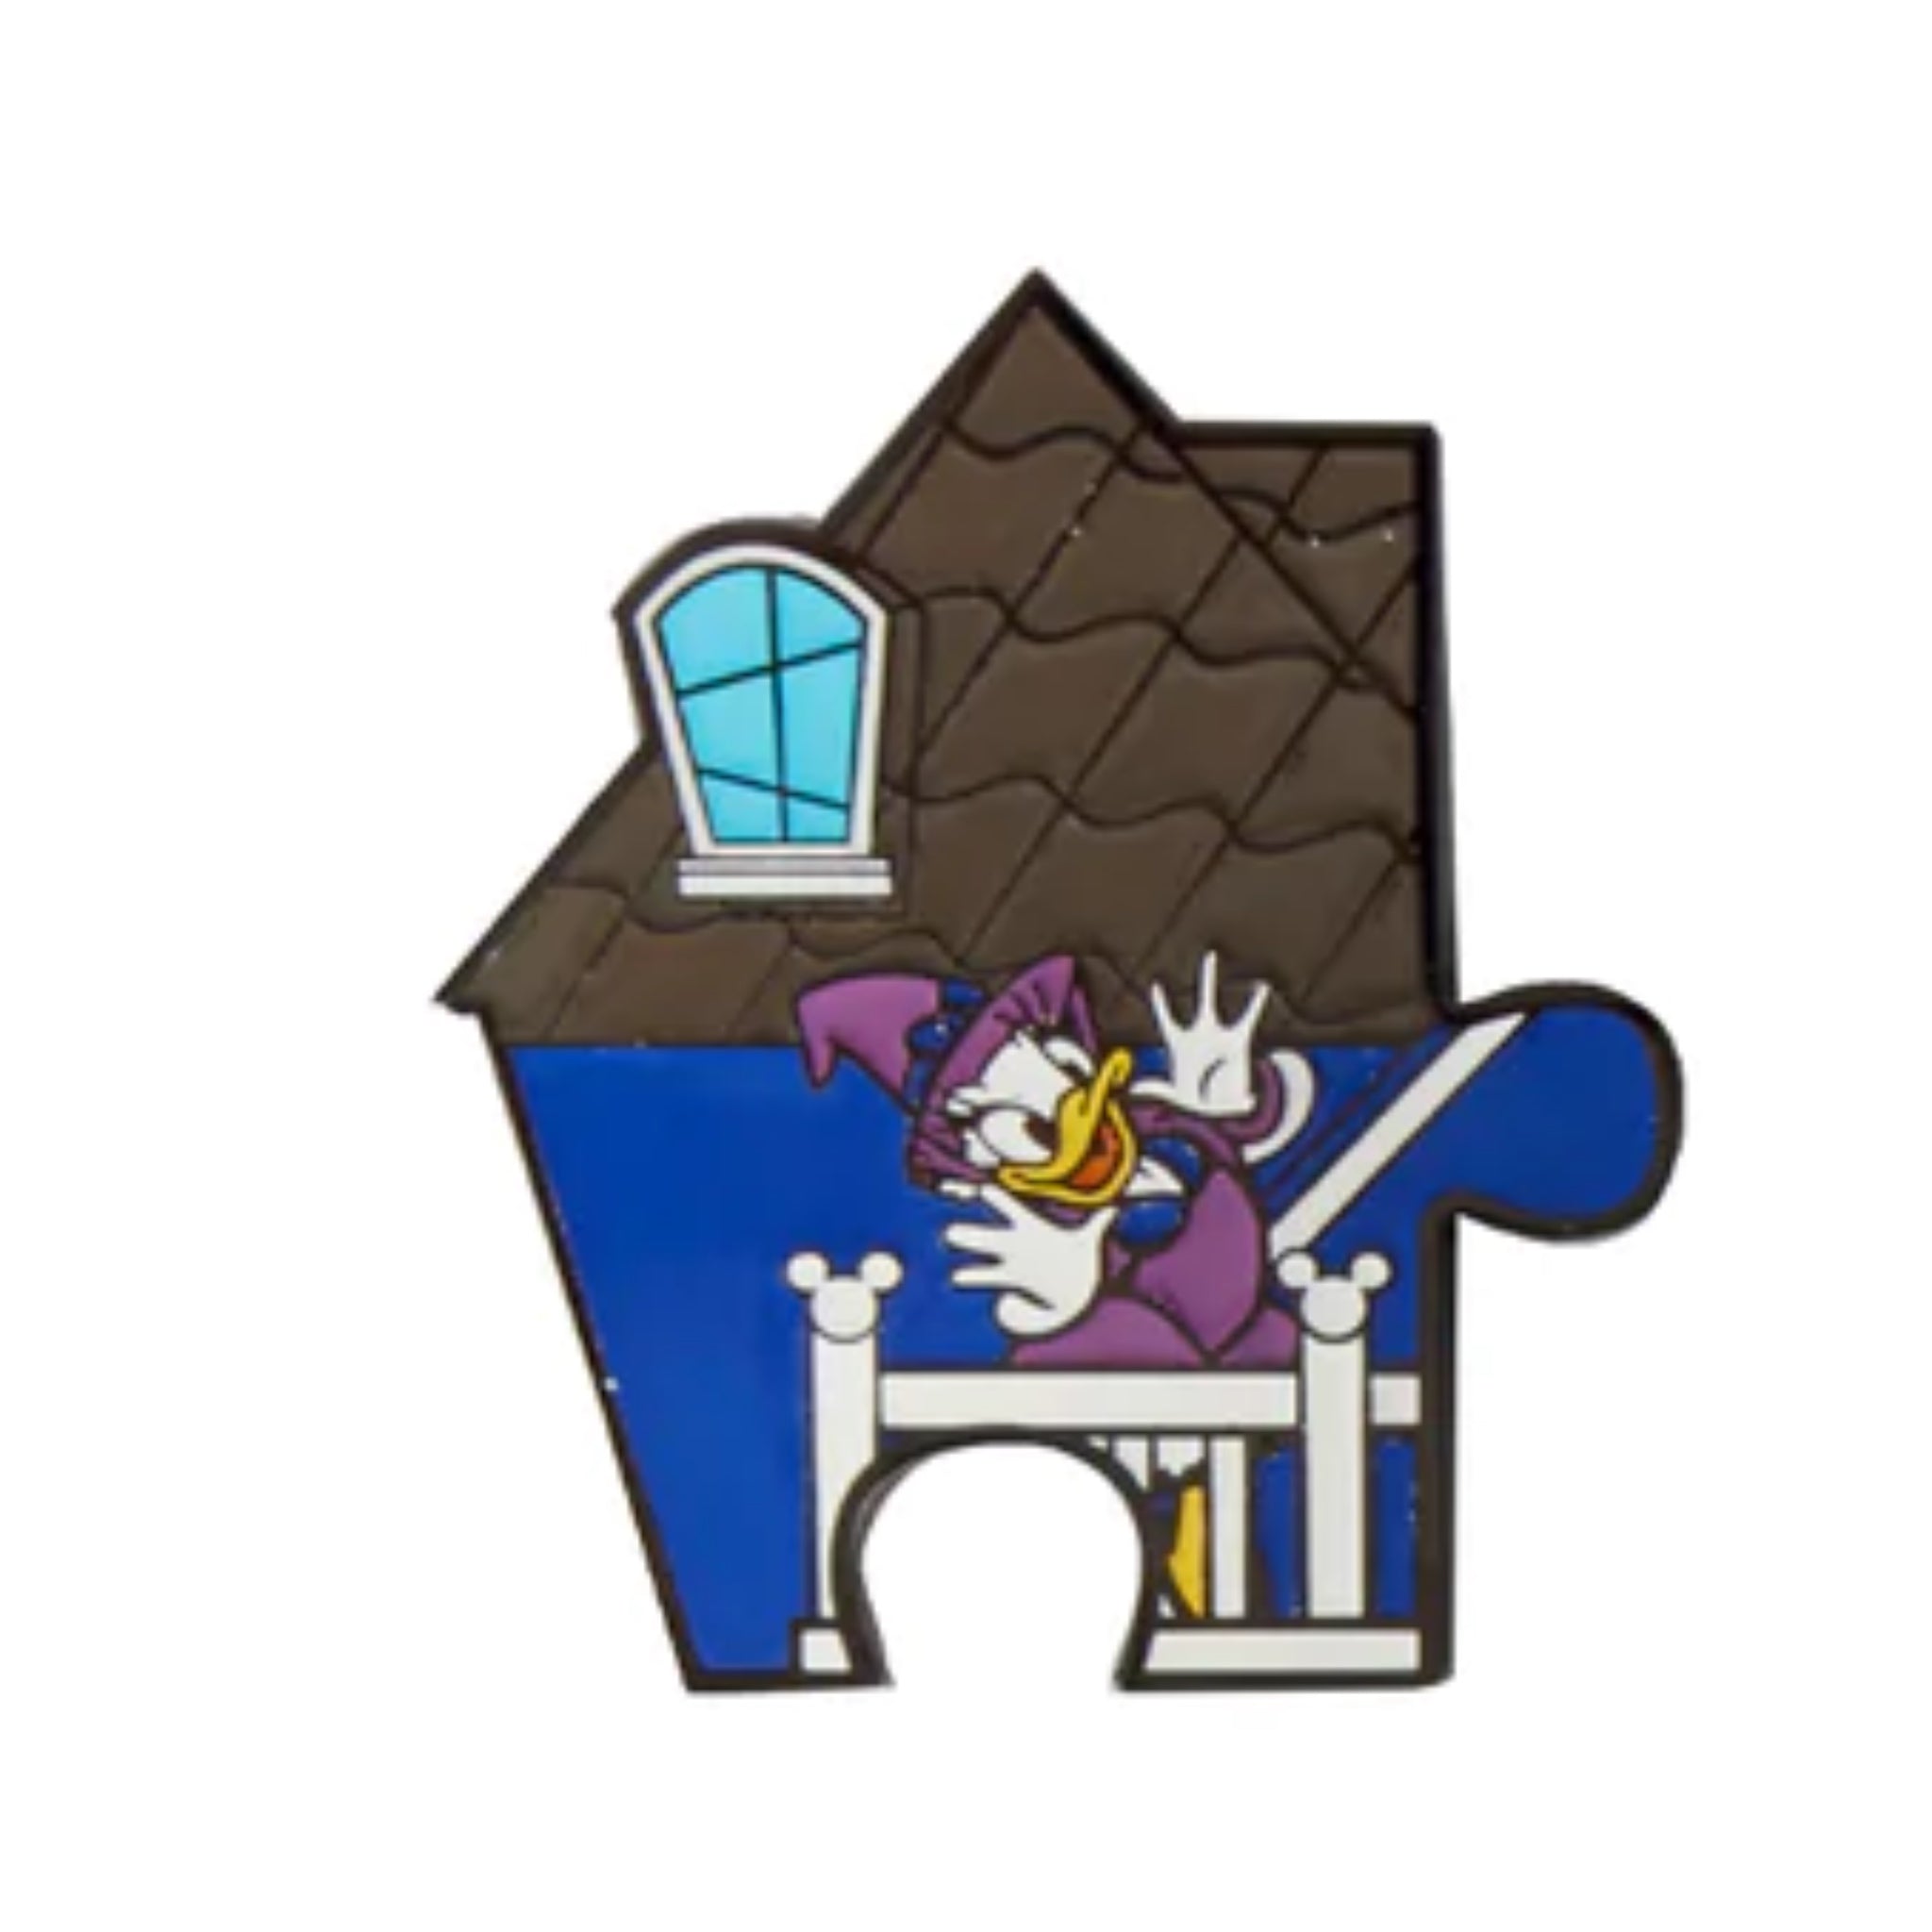 Loungefly Disney Mickey and Friends Haunted House (Blind Box) Pins OPENED FOR YOU